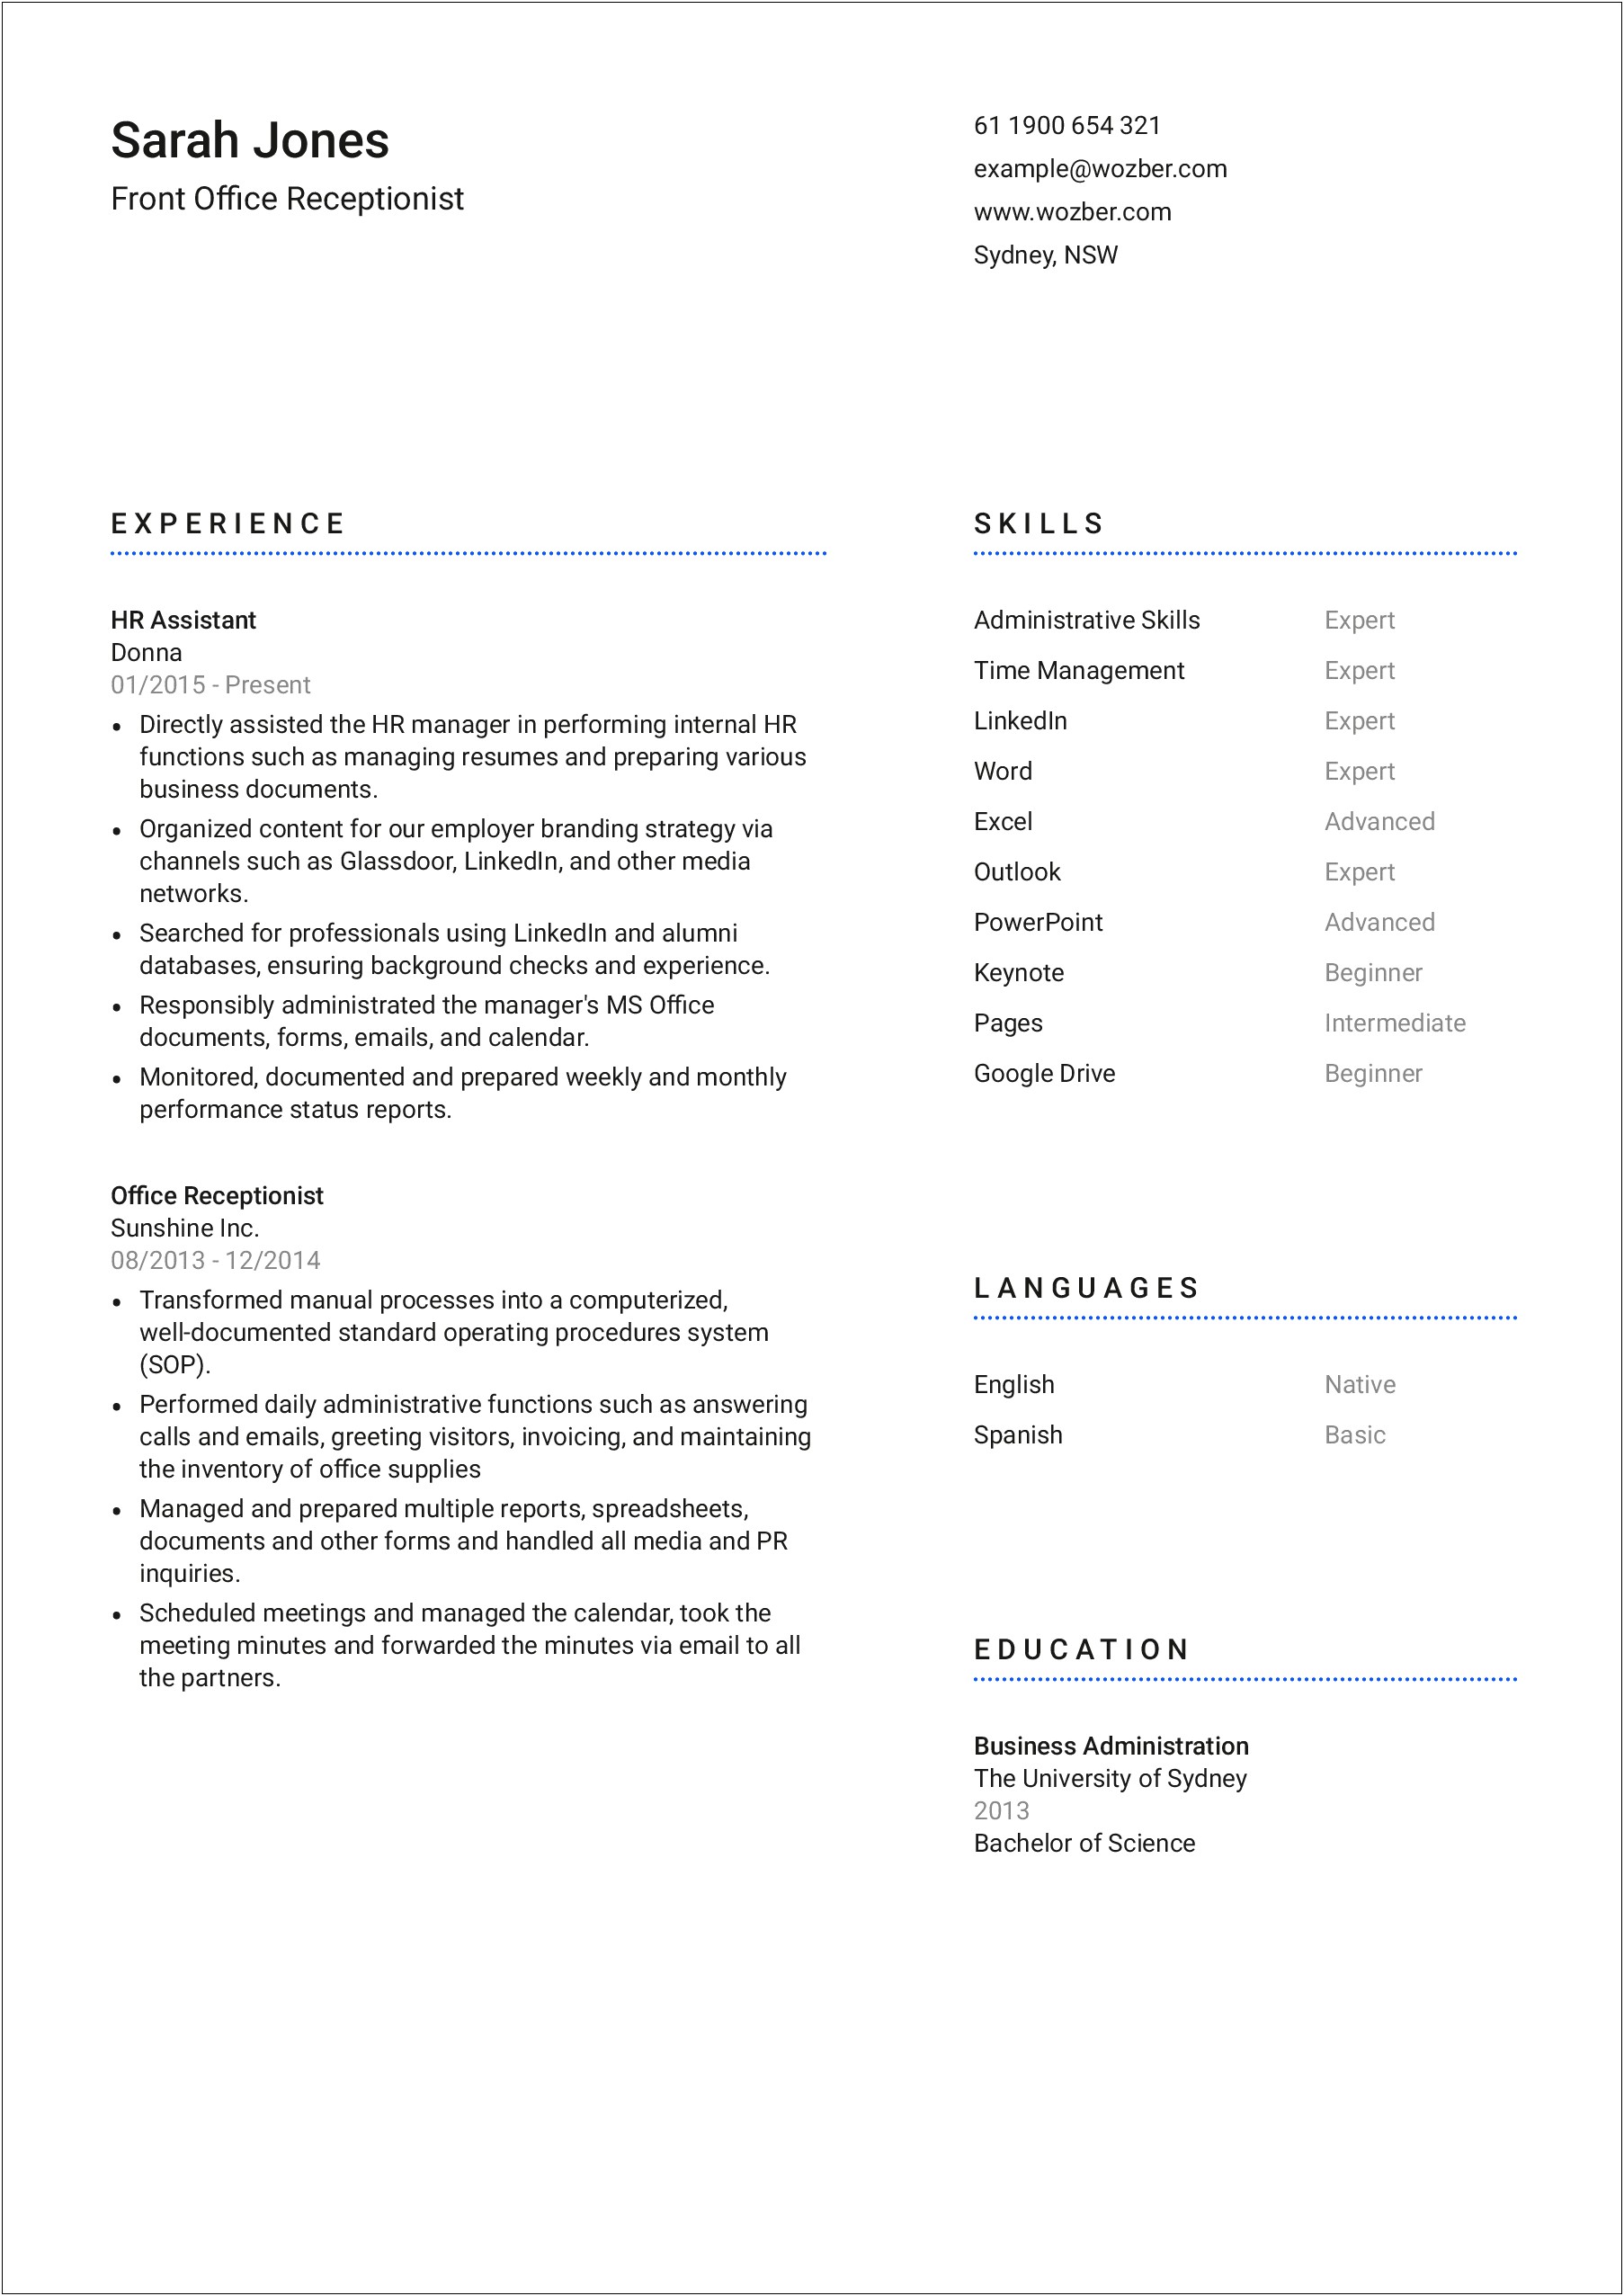 Resume For Production Assistant With No Experience